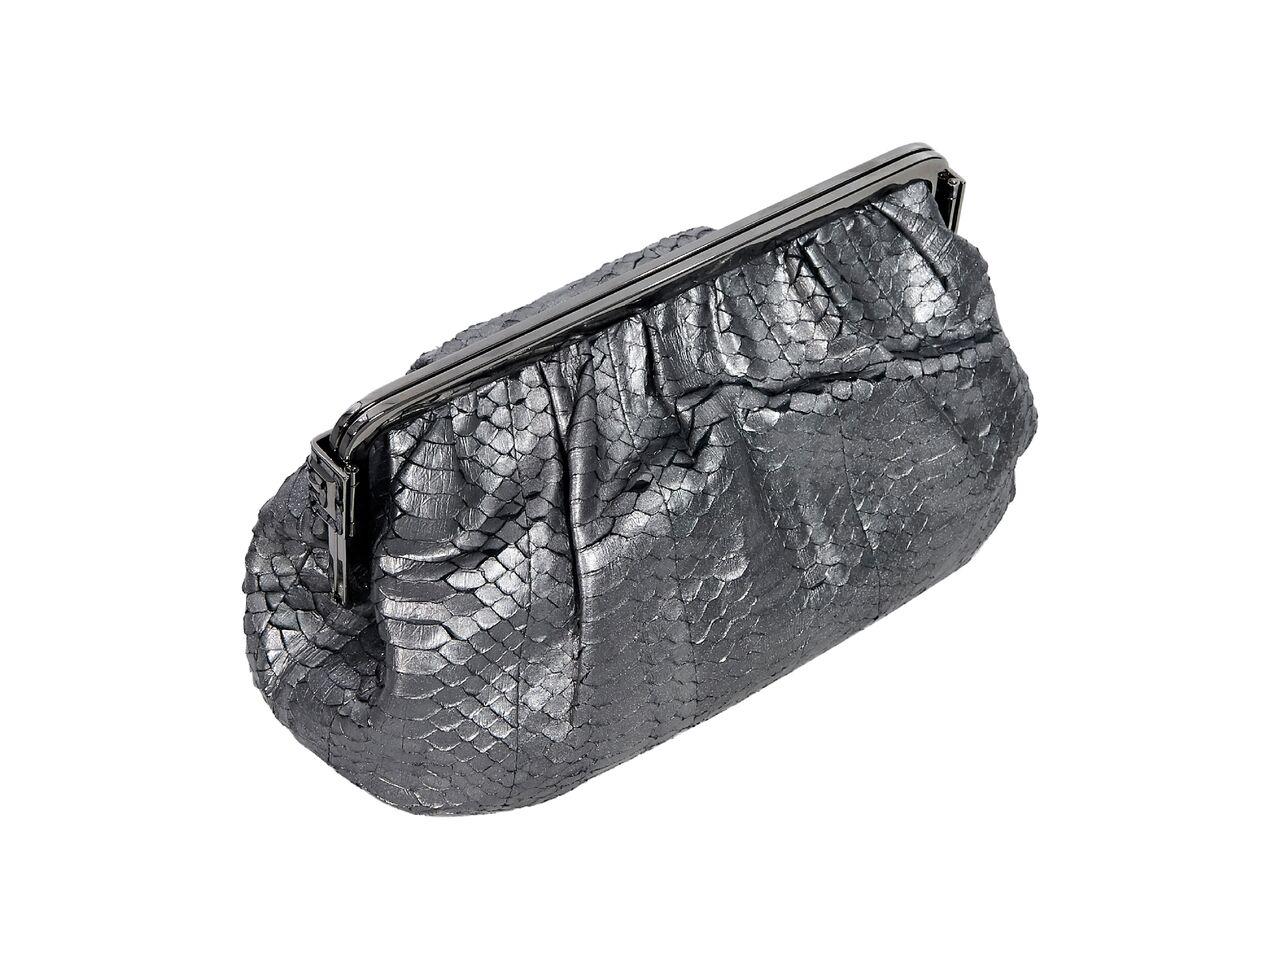 Product details:  Metallic silver snakeskin clutch by Judith Leiber.  Side clasp closures.  Lined interior with inner slide pocket.  Original tags included.  9